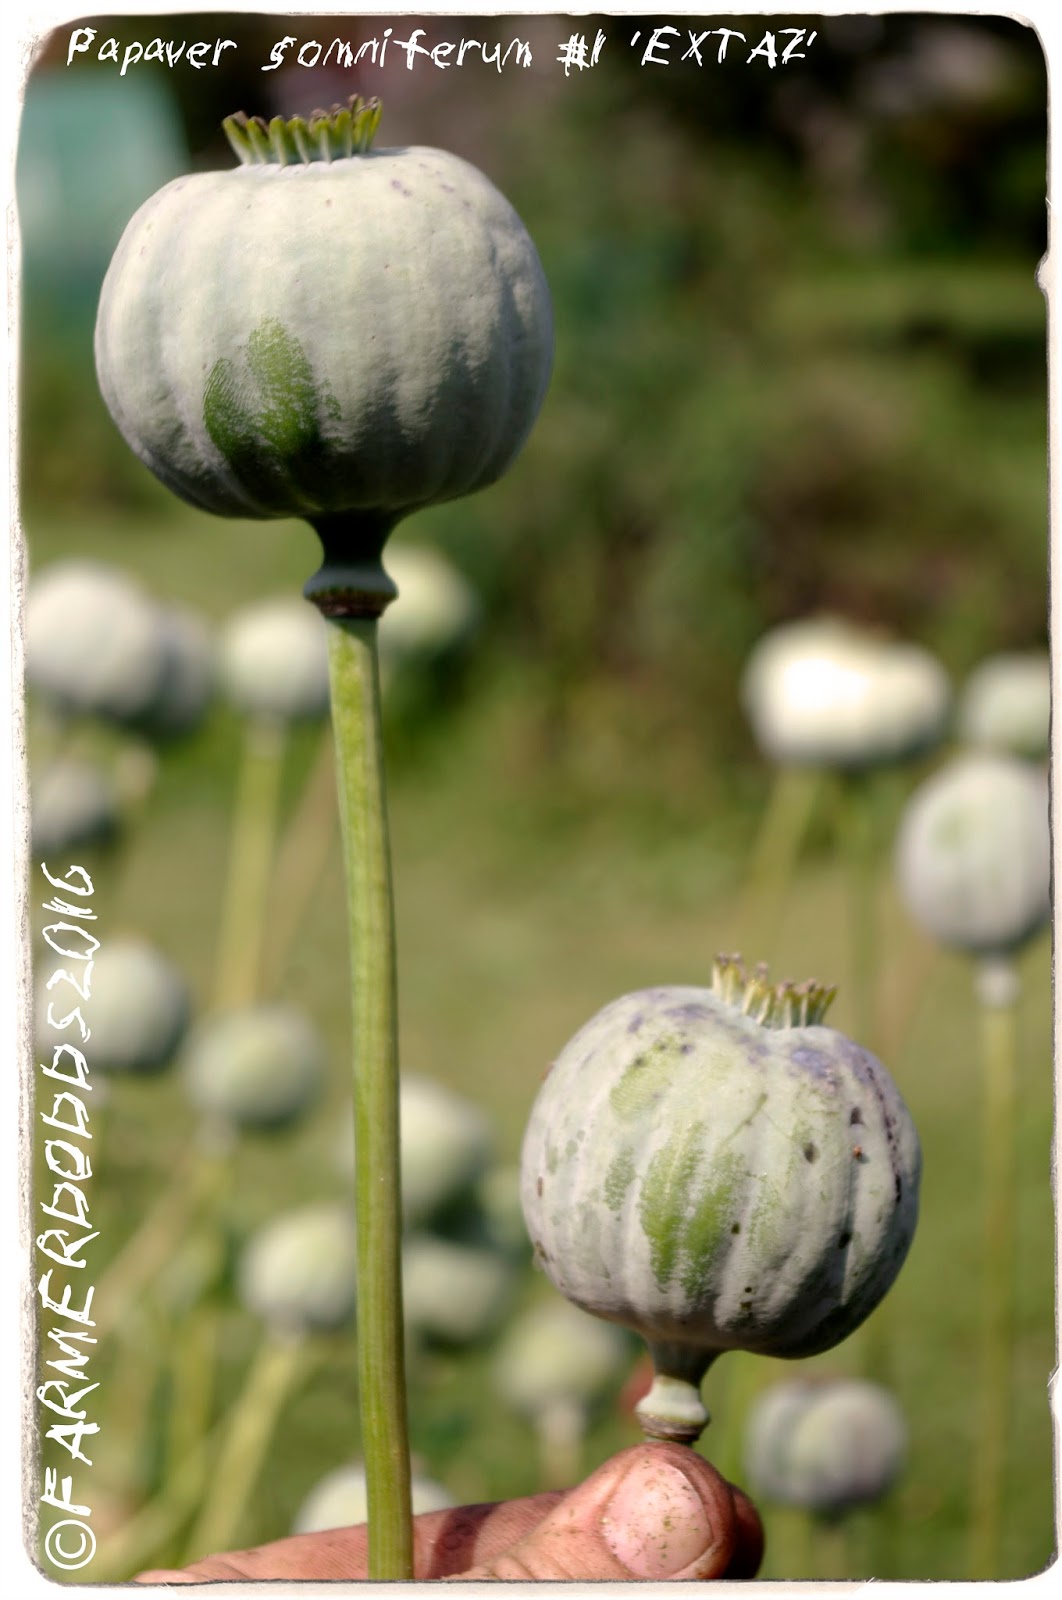 PAPAVER SOMNIFERUM SEEDS: POPPY SEEDS ARE NOW AVAILBLE FROM MY NEW STORE!